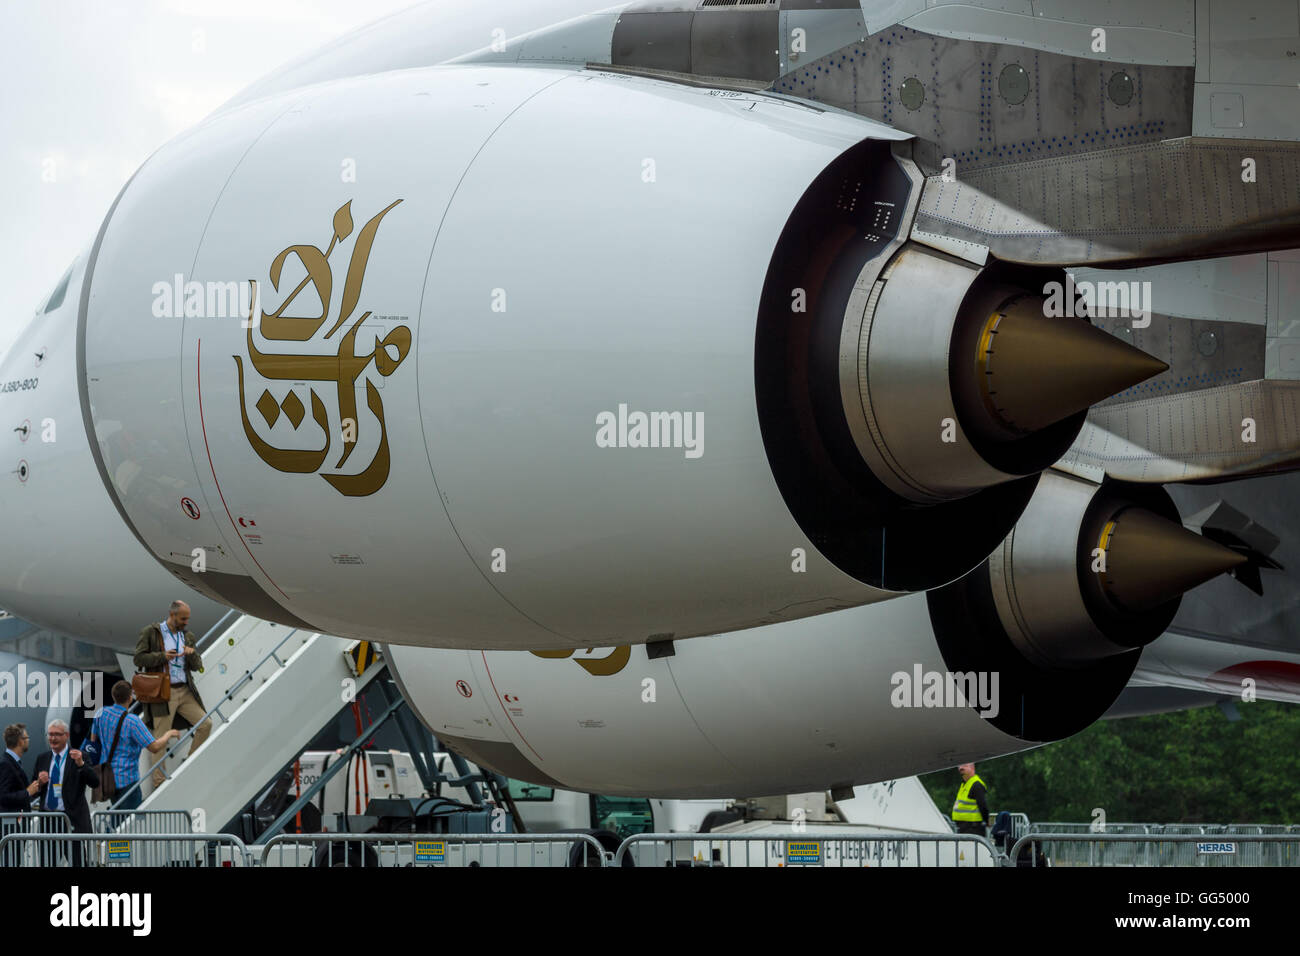 A turbofan engine Rolls-Royce Trent 900 the largest aircraft in the world - Airbus  A380. Emirates Airline Stock Photo - Alamy